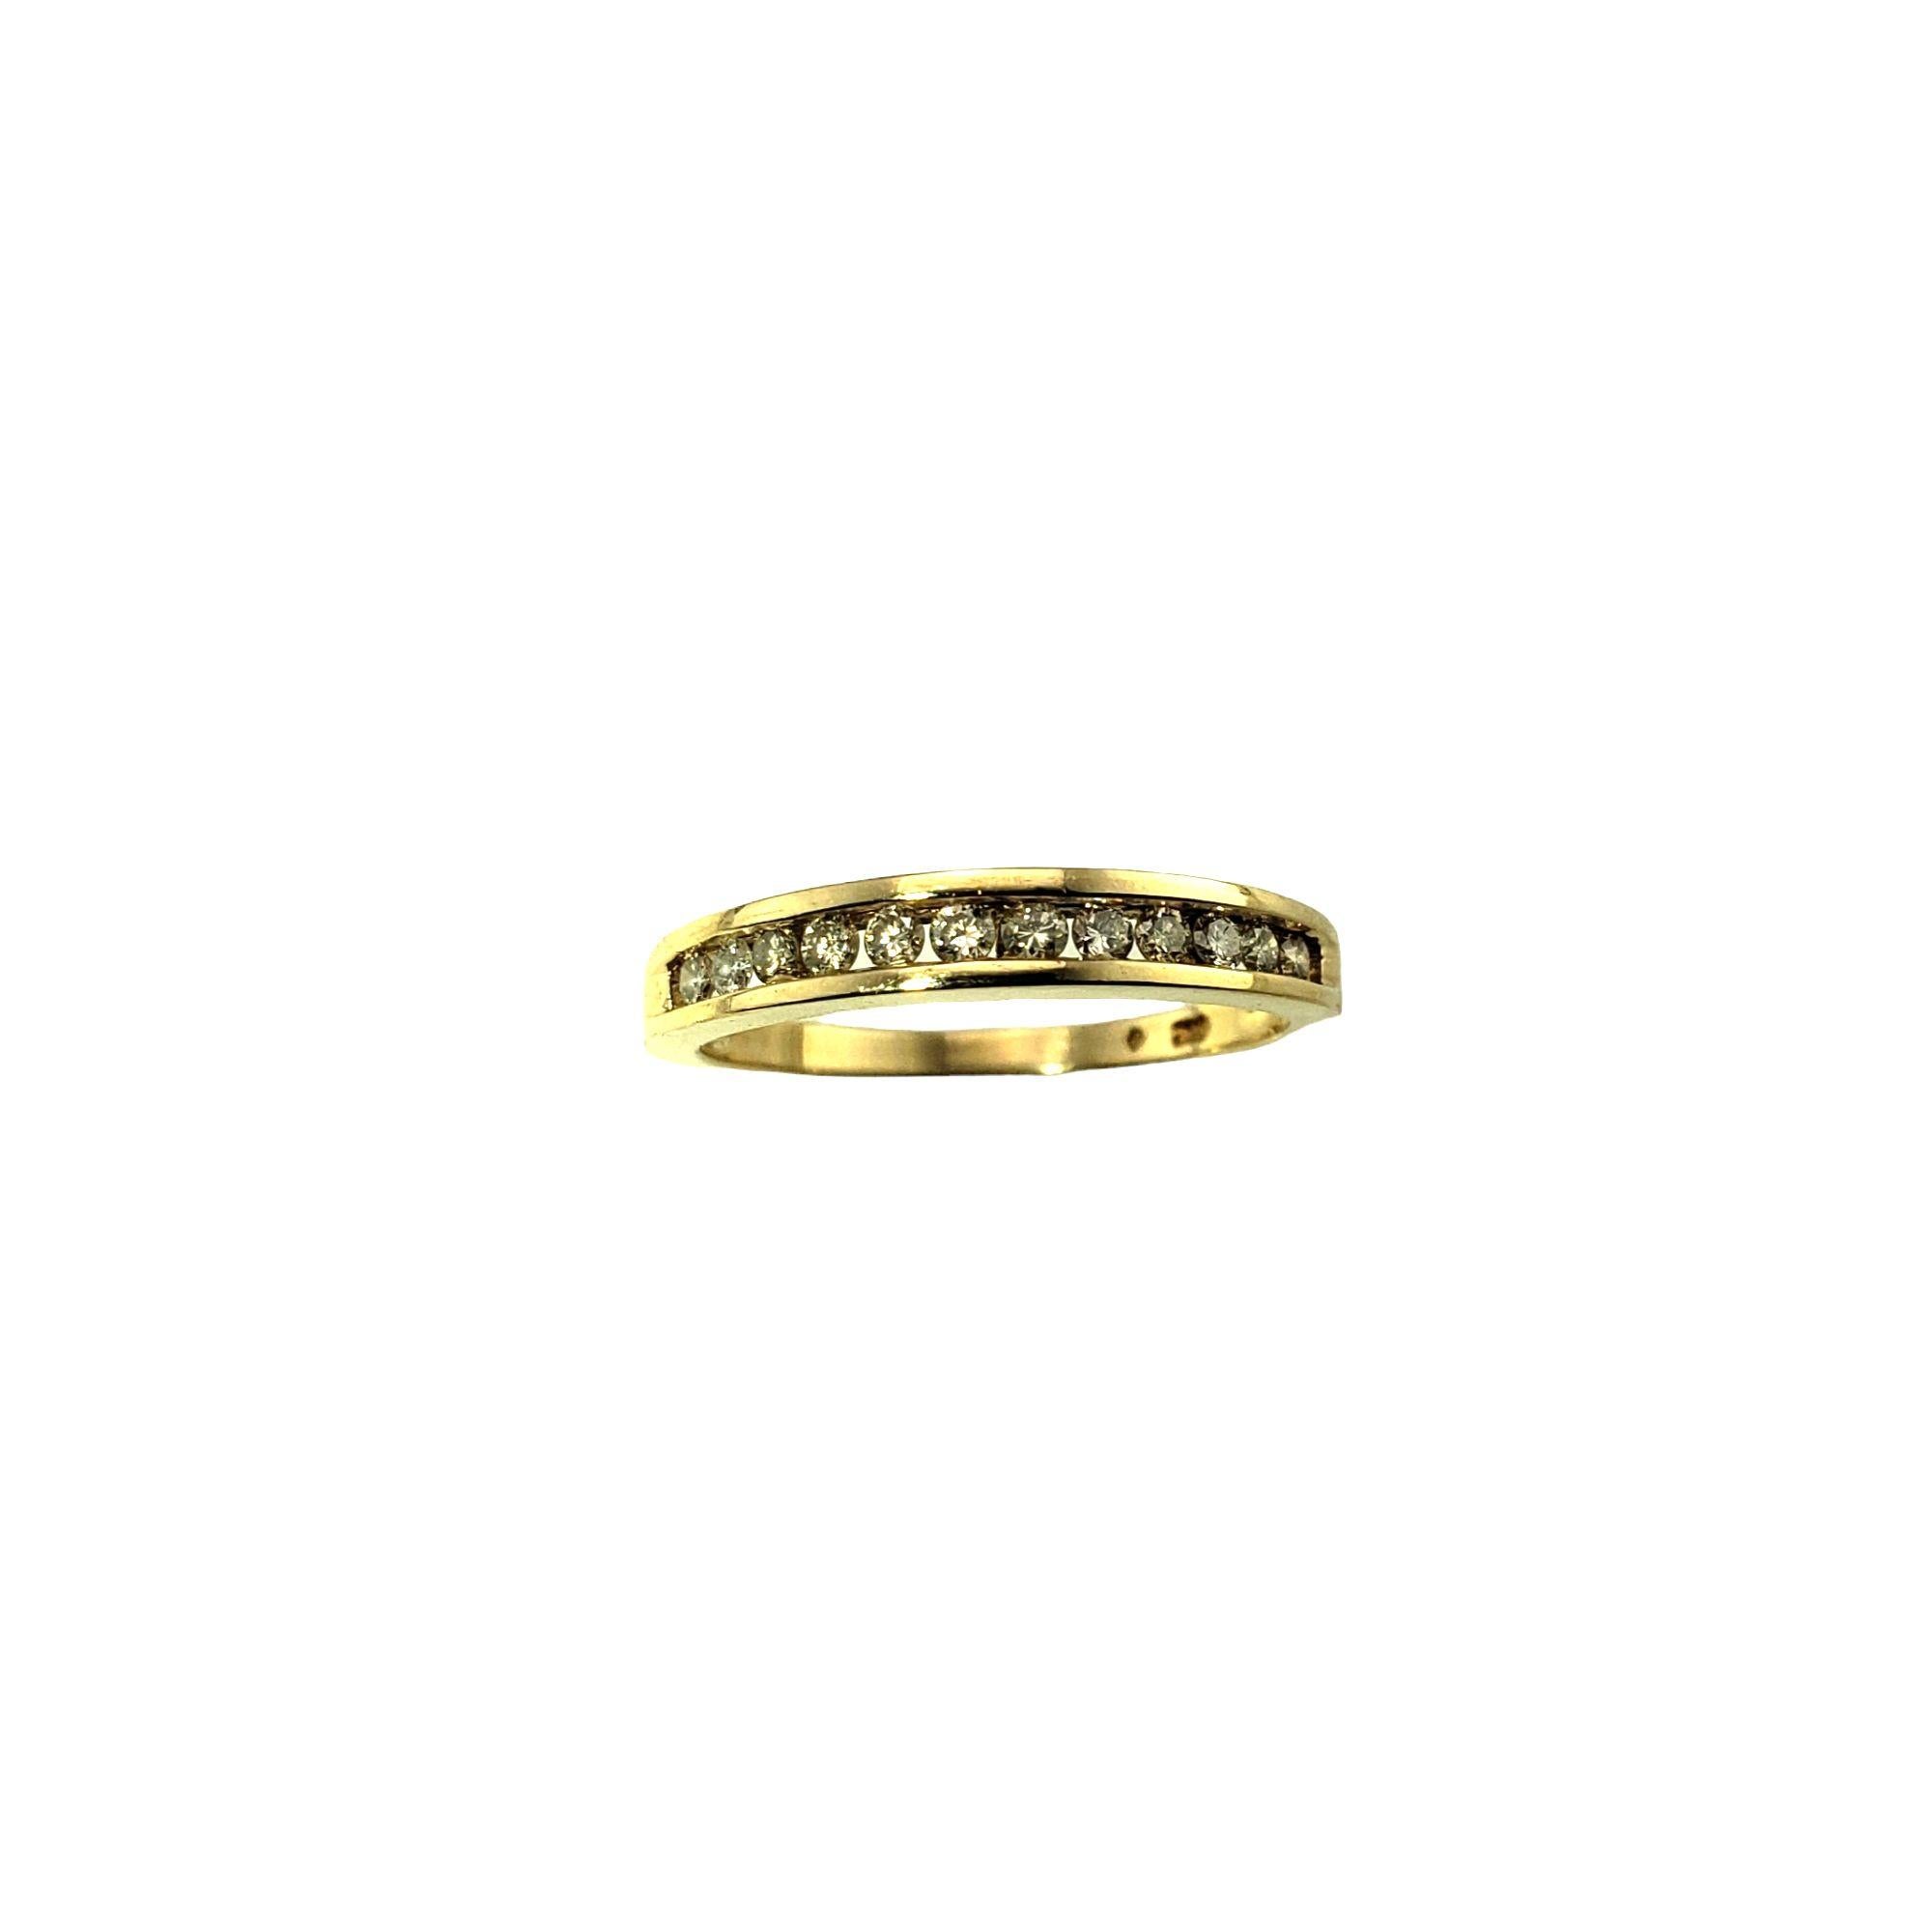 Women's 14 Karat Yellow Gold and Diamond Wedding Band Ring Size 6.75 For Sale